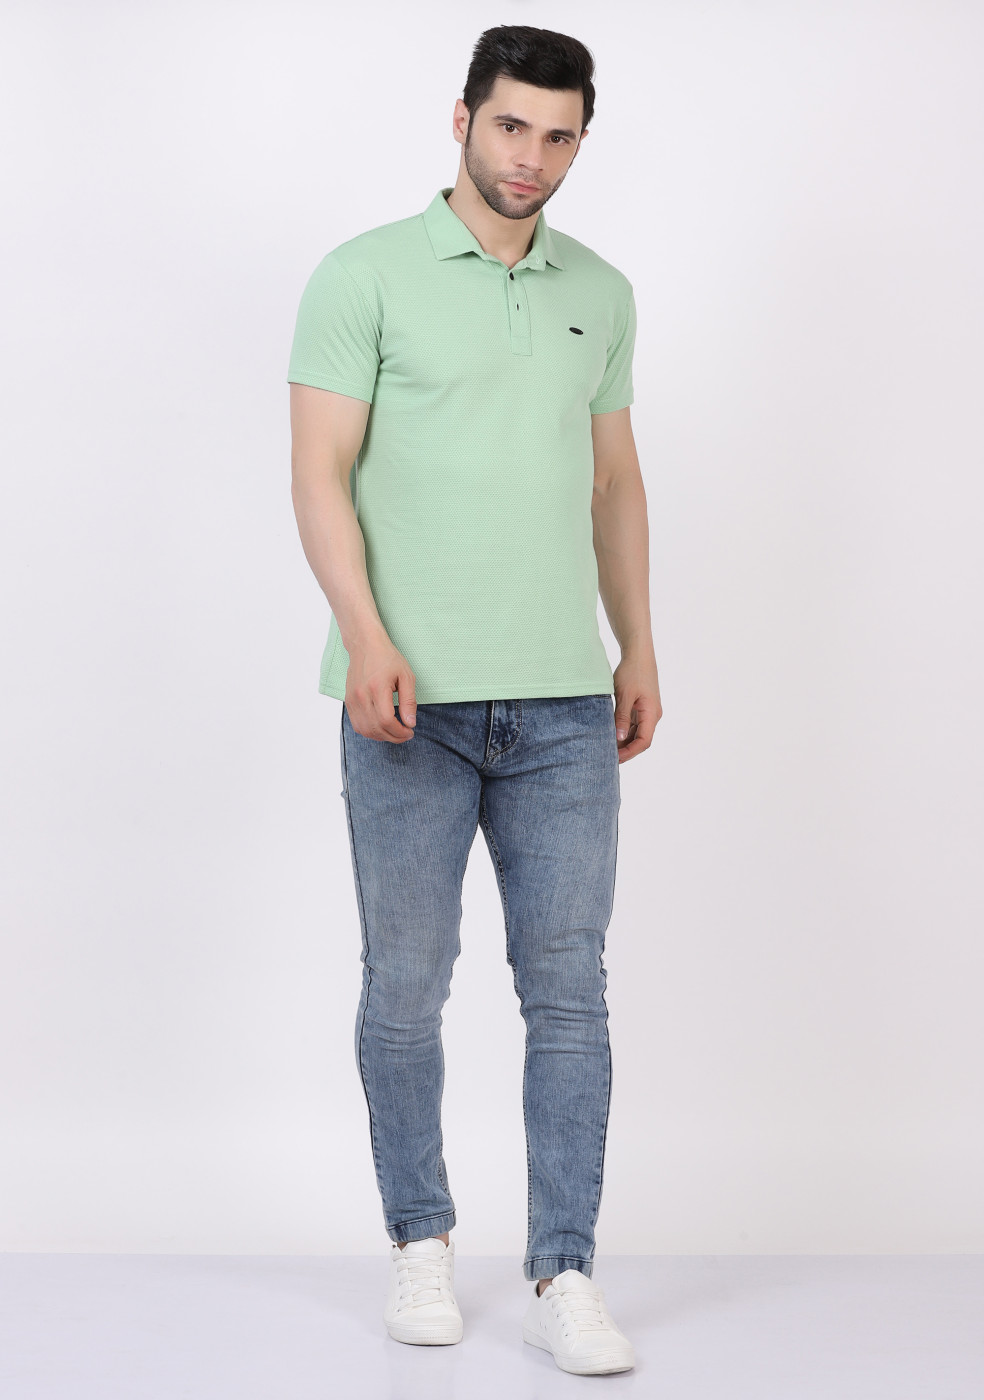 Popcorn Textured Casual Polo T Shirts For Men